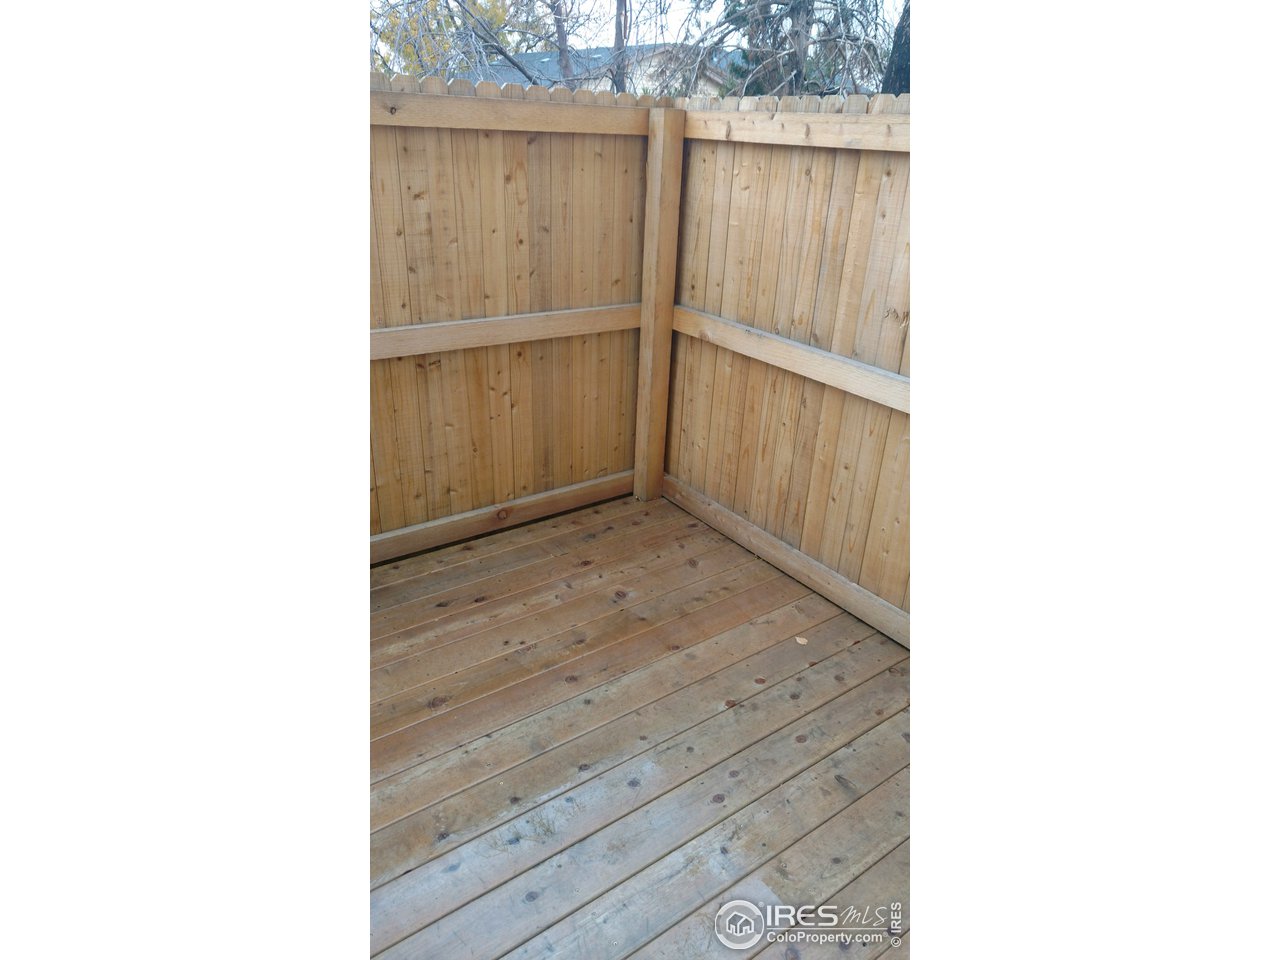 Privacy fenced yard with deck